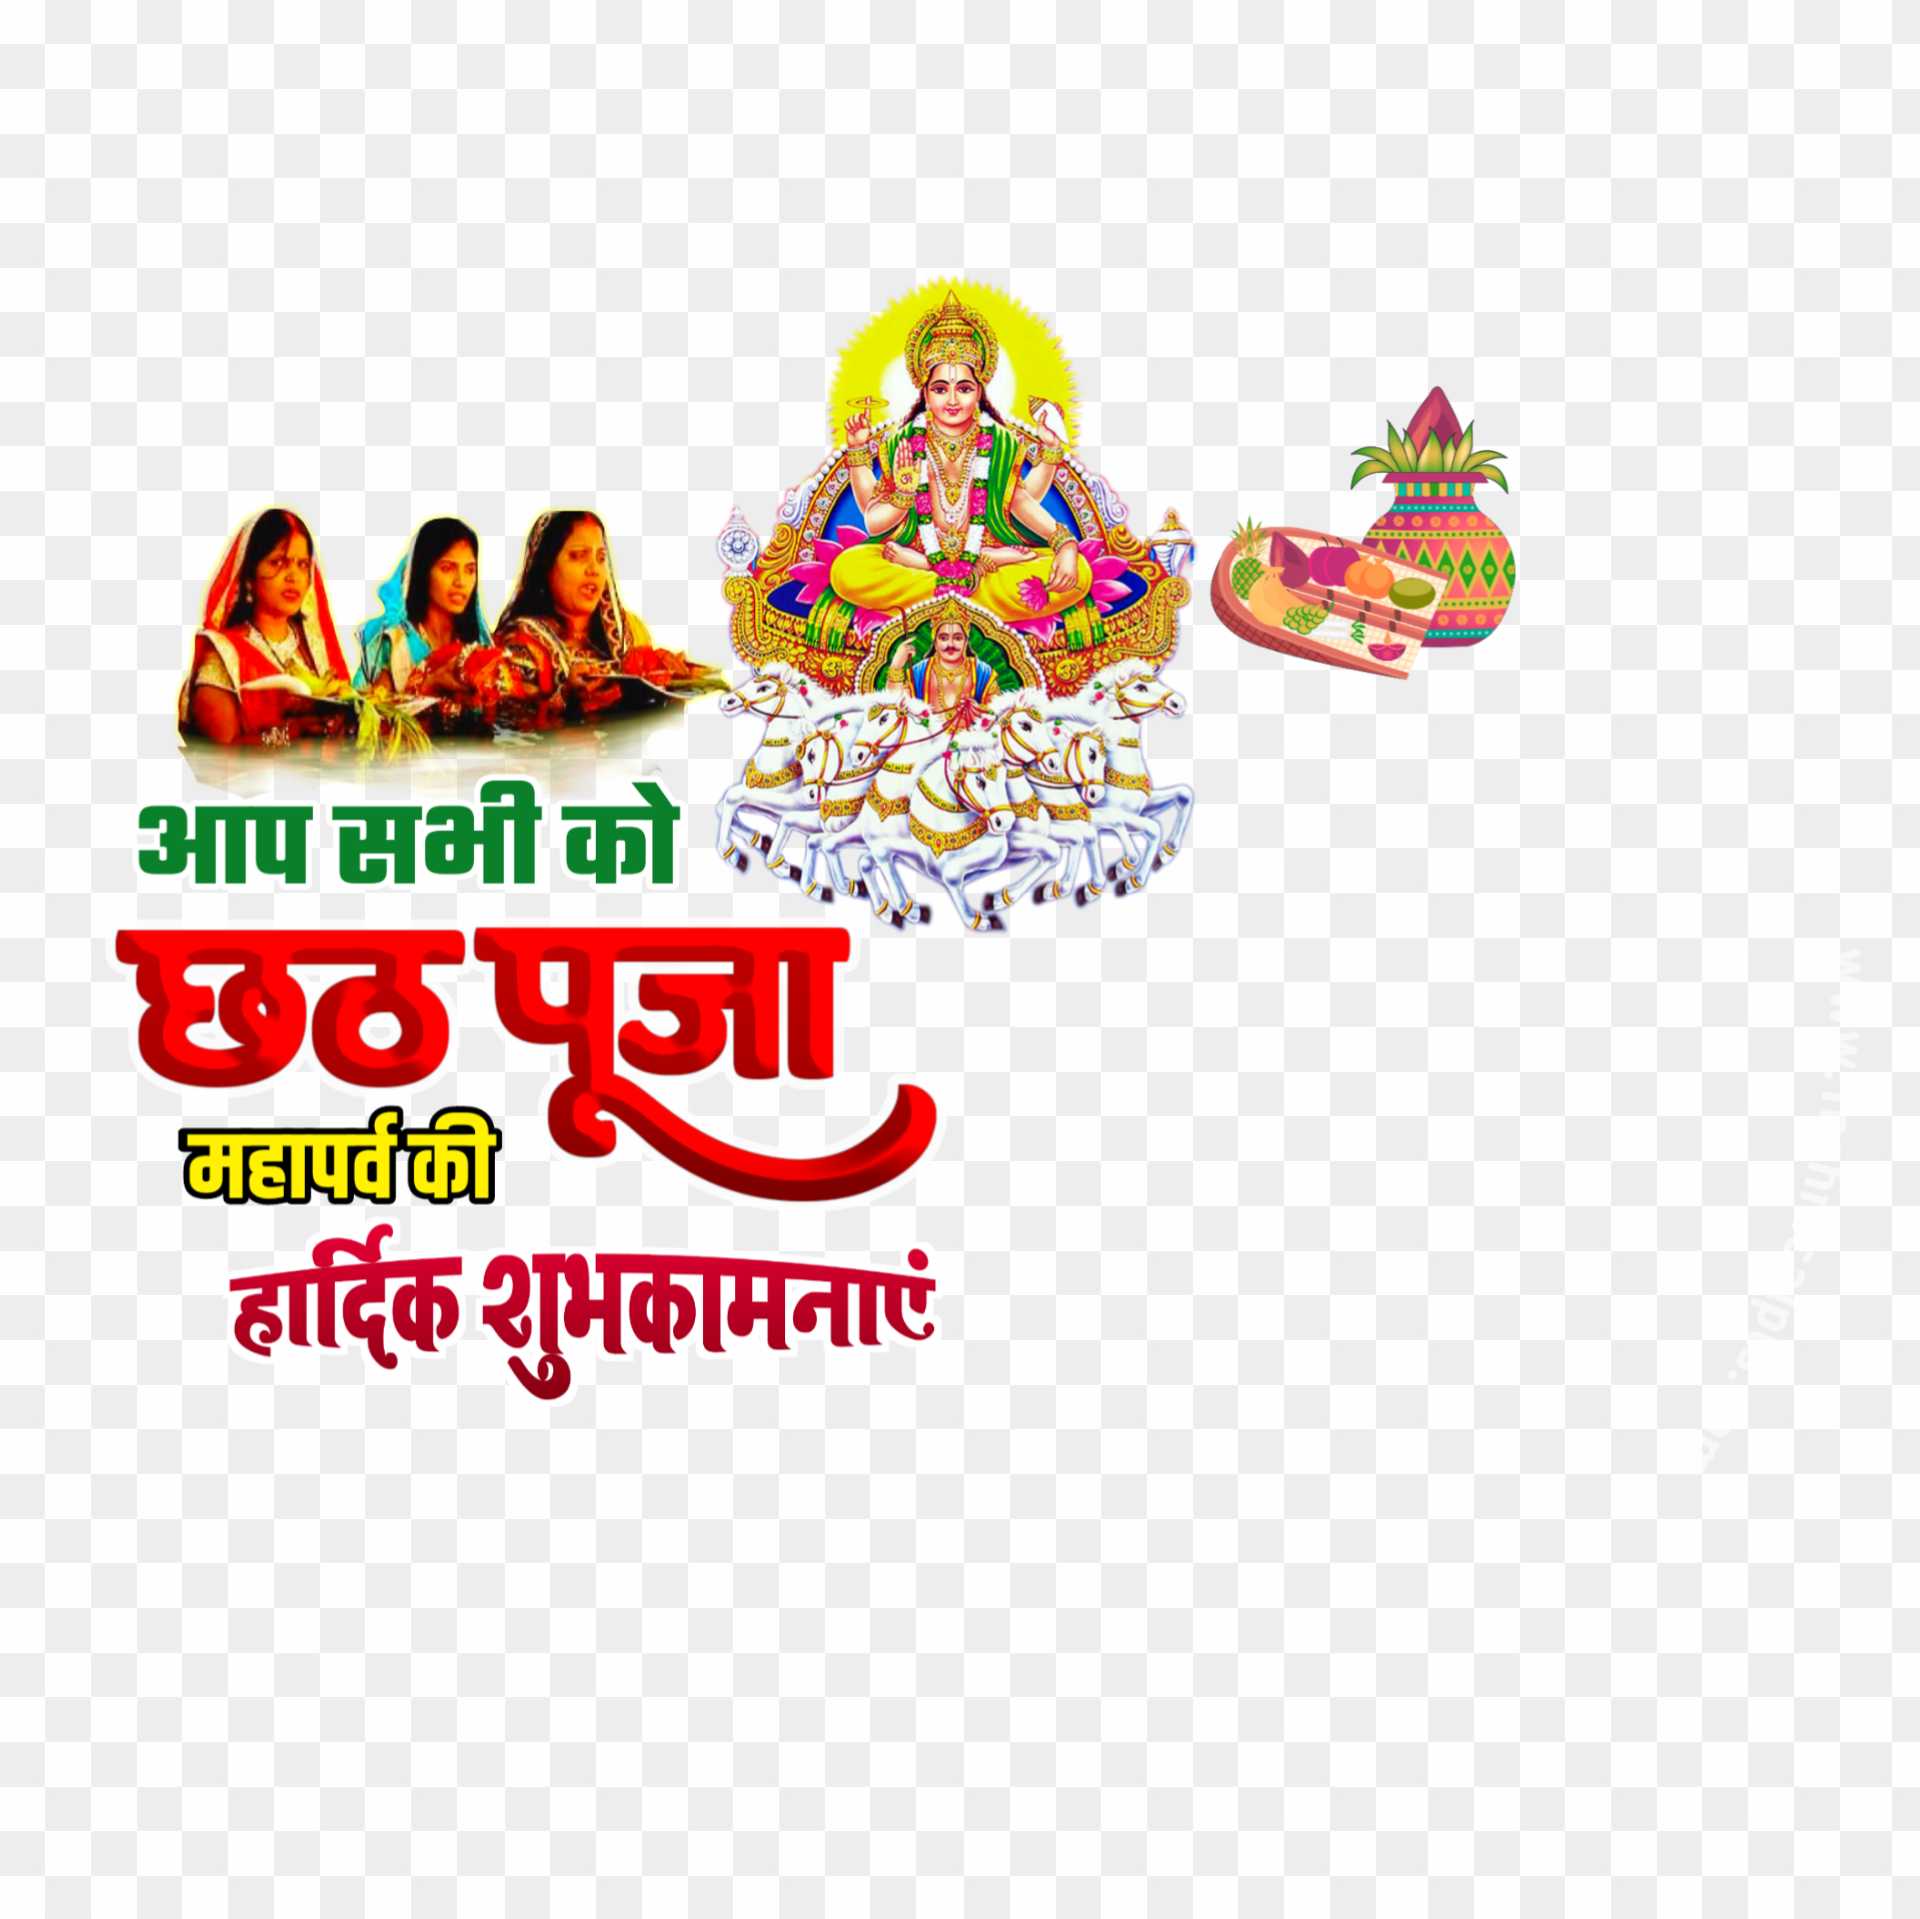 Happy Chhath Puja Png images in hindi 